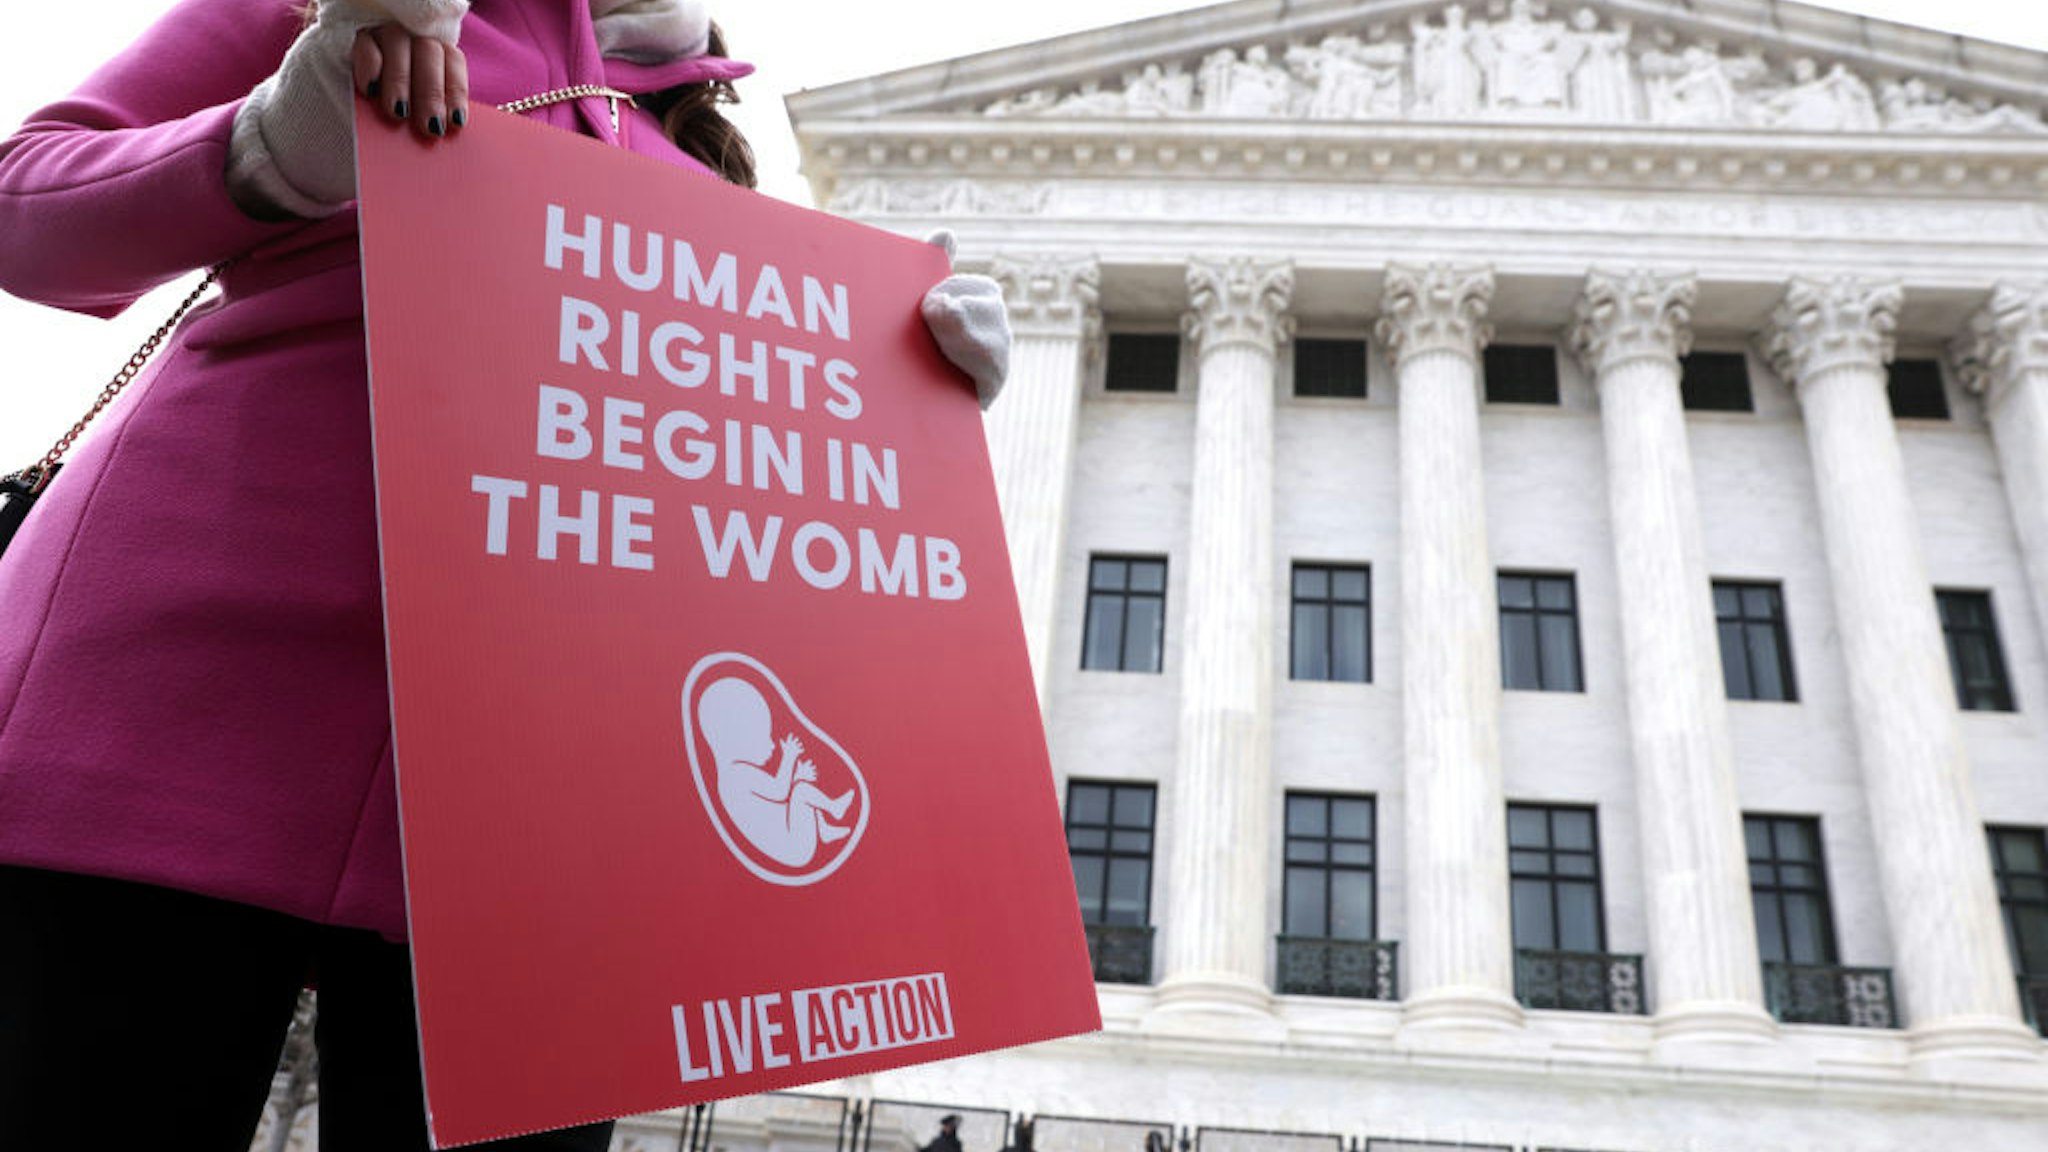 WASHINGTON, DC - JANUARY 29: A pro-life activist holds a sign outside the U.S. Supreme Court during the 48th annual March for Life January 29, 2021 in Washington, DC. Due to the COVID-19 pandemic, a much smaller group of activists participated in the annual march that marked the 1973 Roe v. Wade ruling by the U.S. Supreme Court that had legalized abortion.